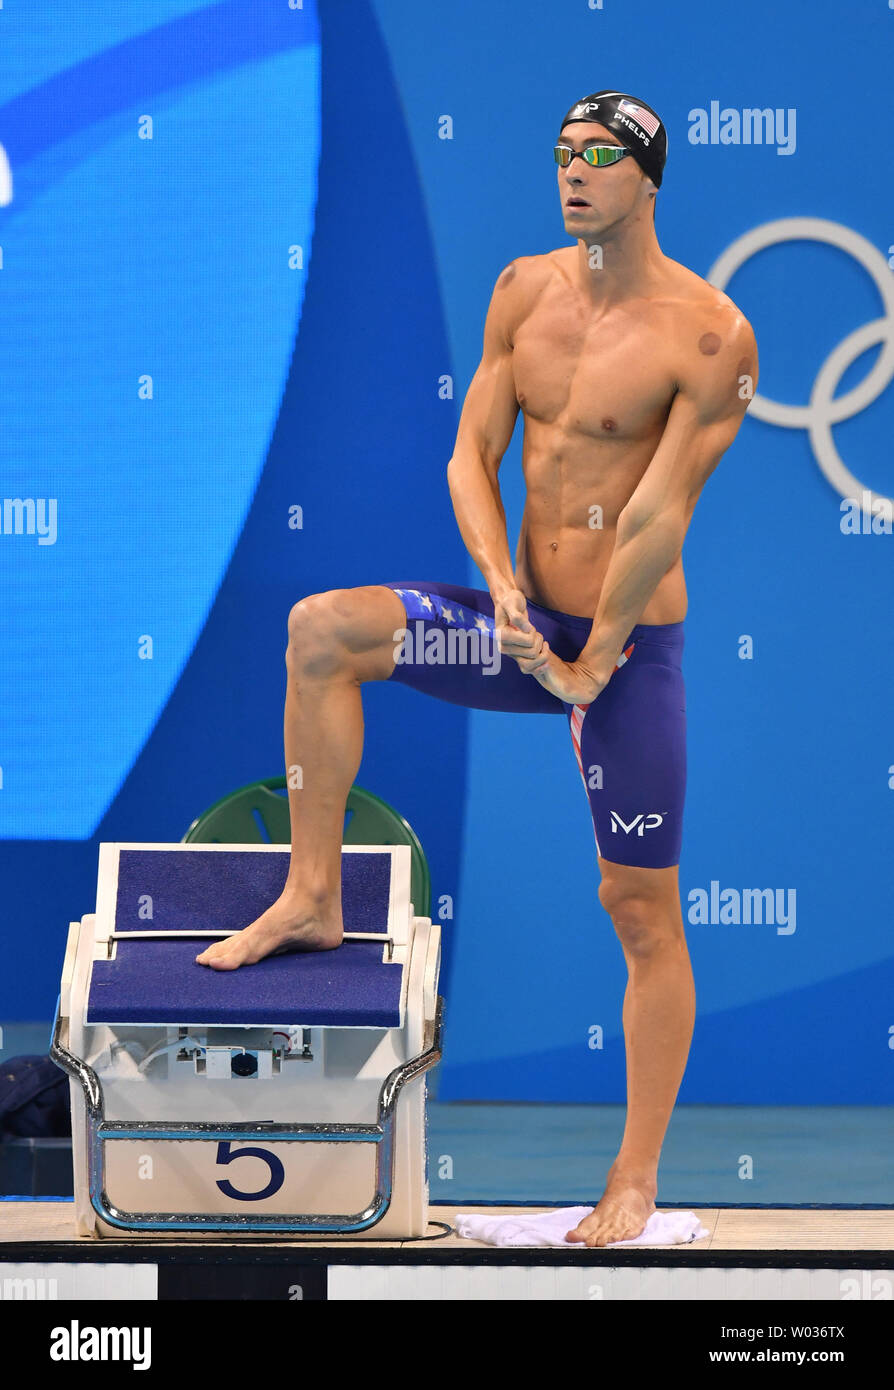 Michael Phelps of the United States prepares to compete in the Men's 200m butterfly at the Olympic Aquatics Stadium at the 2016 Rio Summer Olympics in Rio de Janeiro, Brazil, on August 9, 2016. Phelps went on to win gold with a time of with a time of 1:53.36. This is his 20th career gold medal. Photo by Kevin Dietsch/UPI Stock Photo